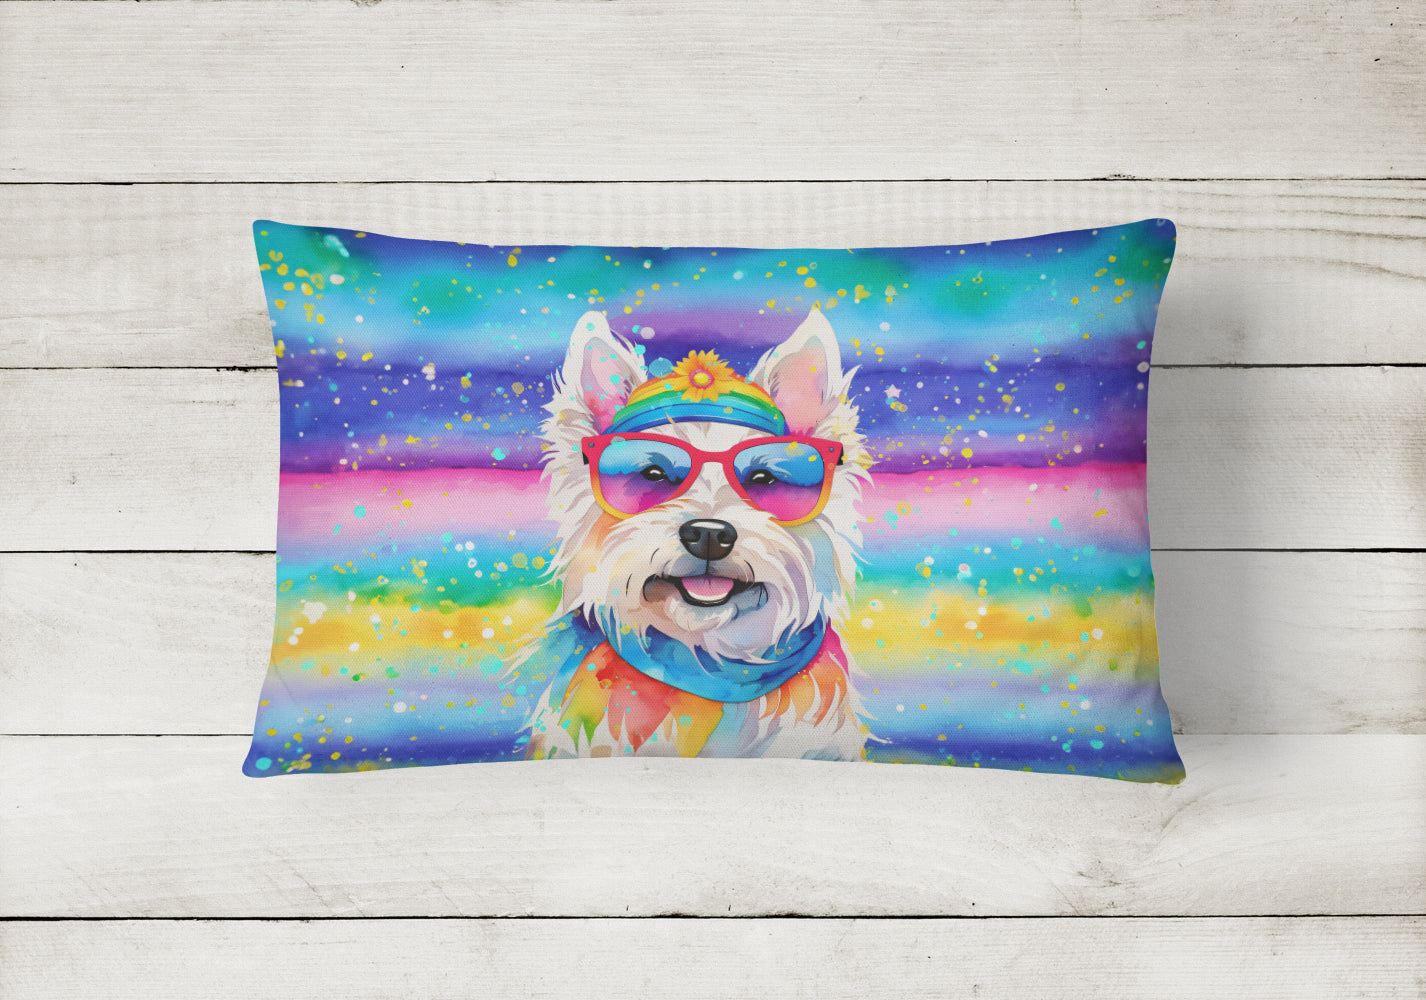 Buy this Westie Hippie Dawg Fabric Decorative Pillow